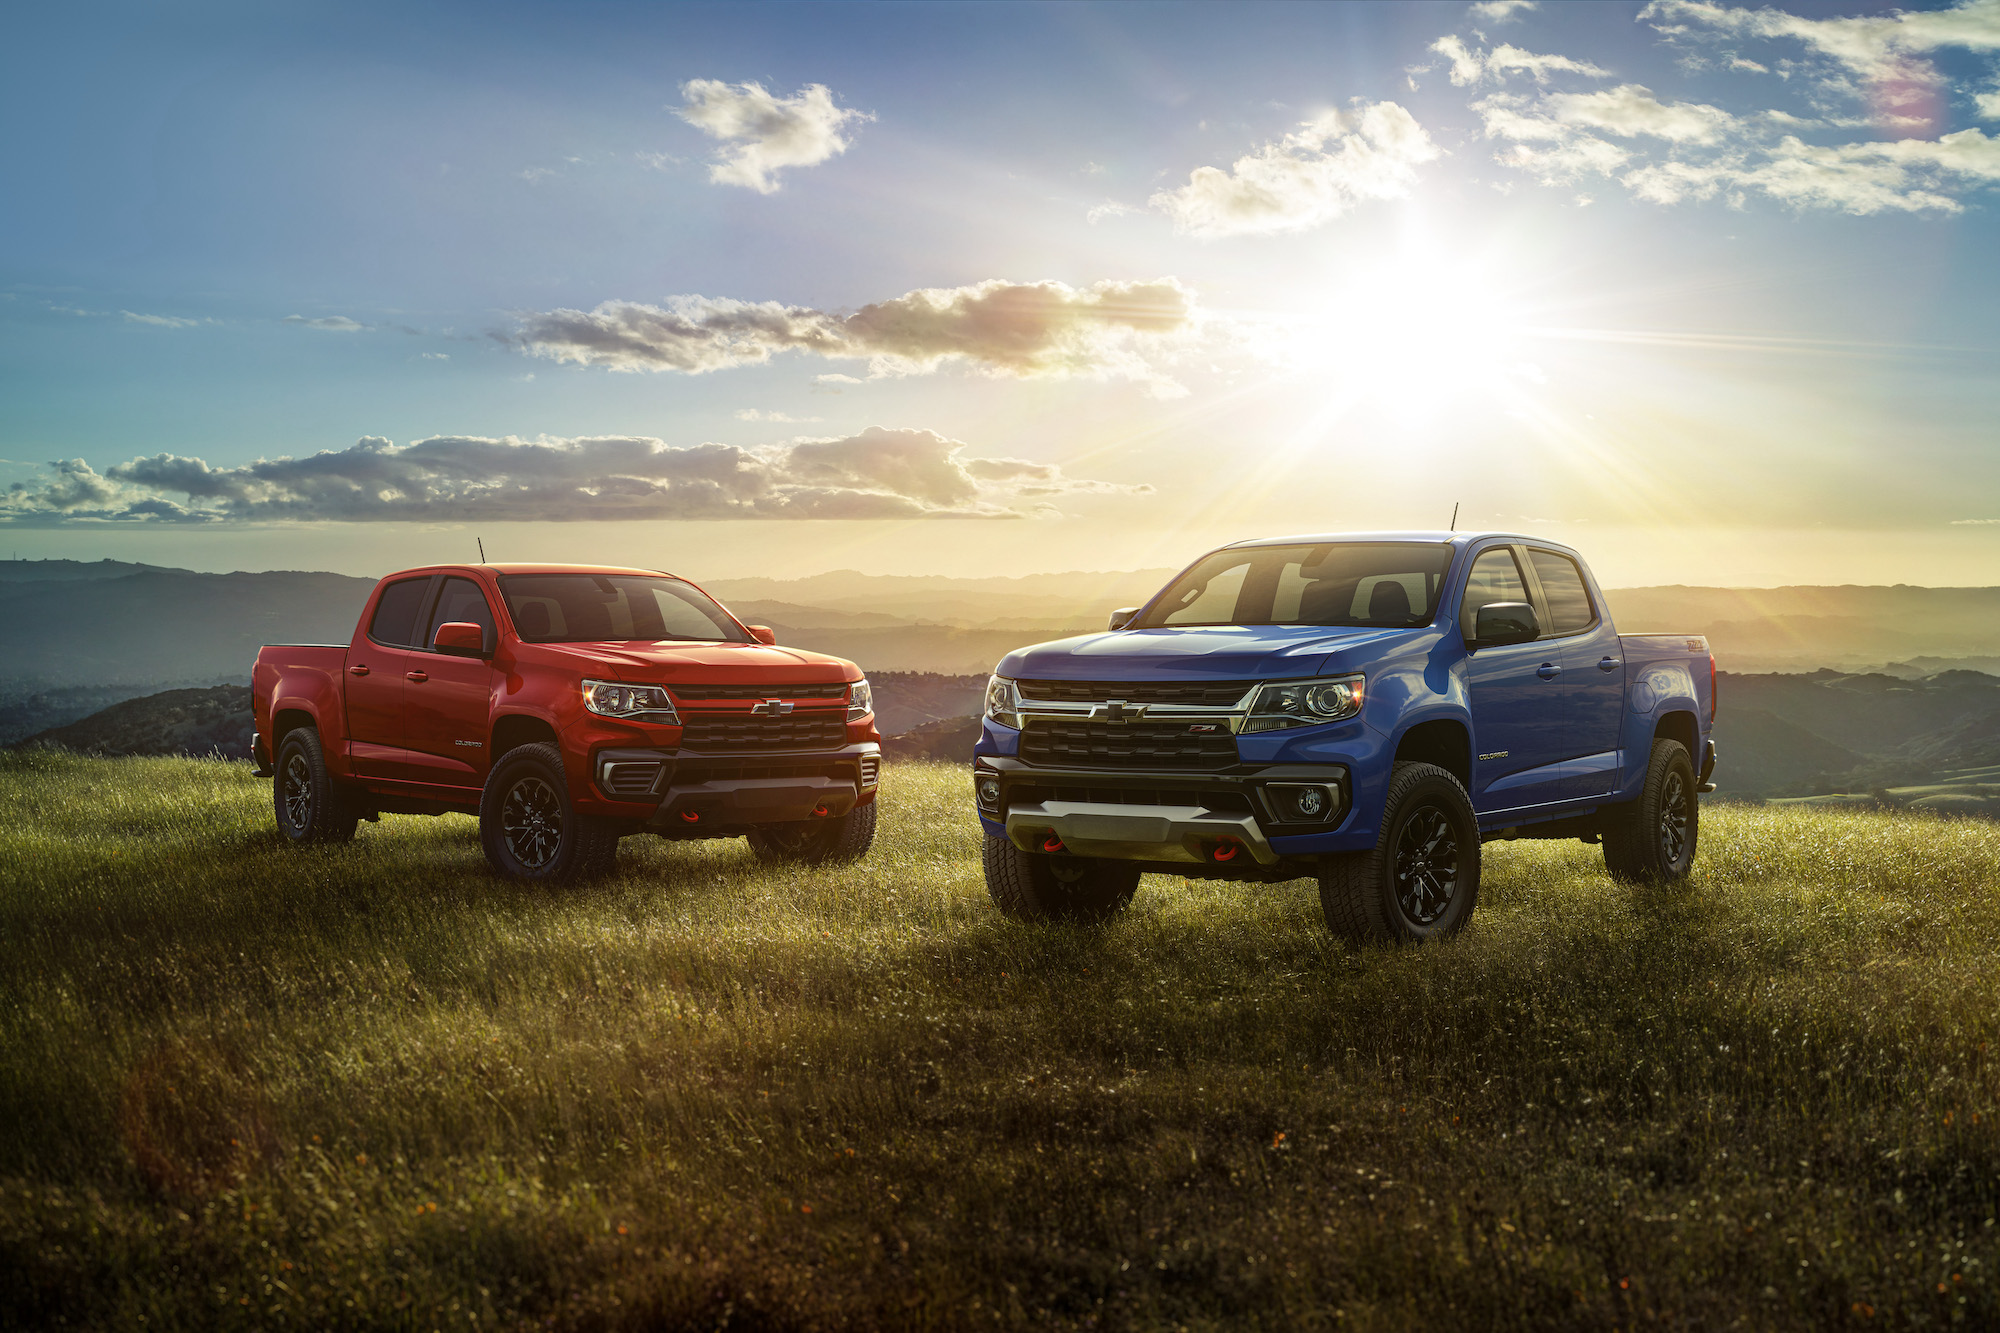 Two 2022 Chevrolet Colorado Trail Boss pickup trucks parked on a grassy hill with the sun and mountains behind them